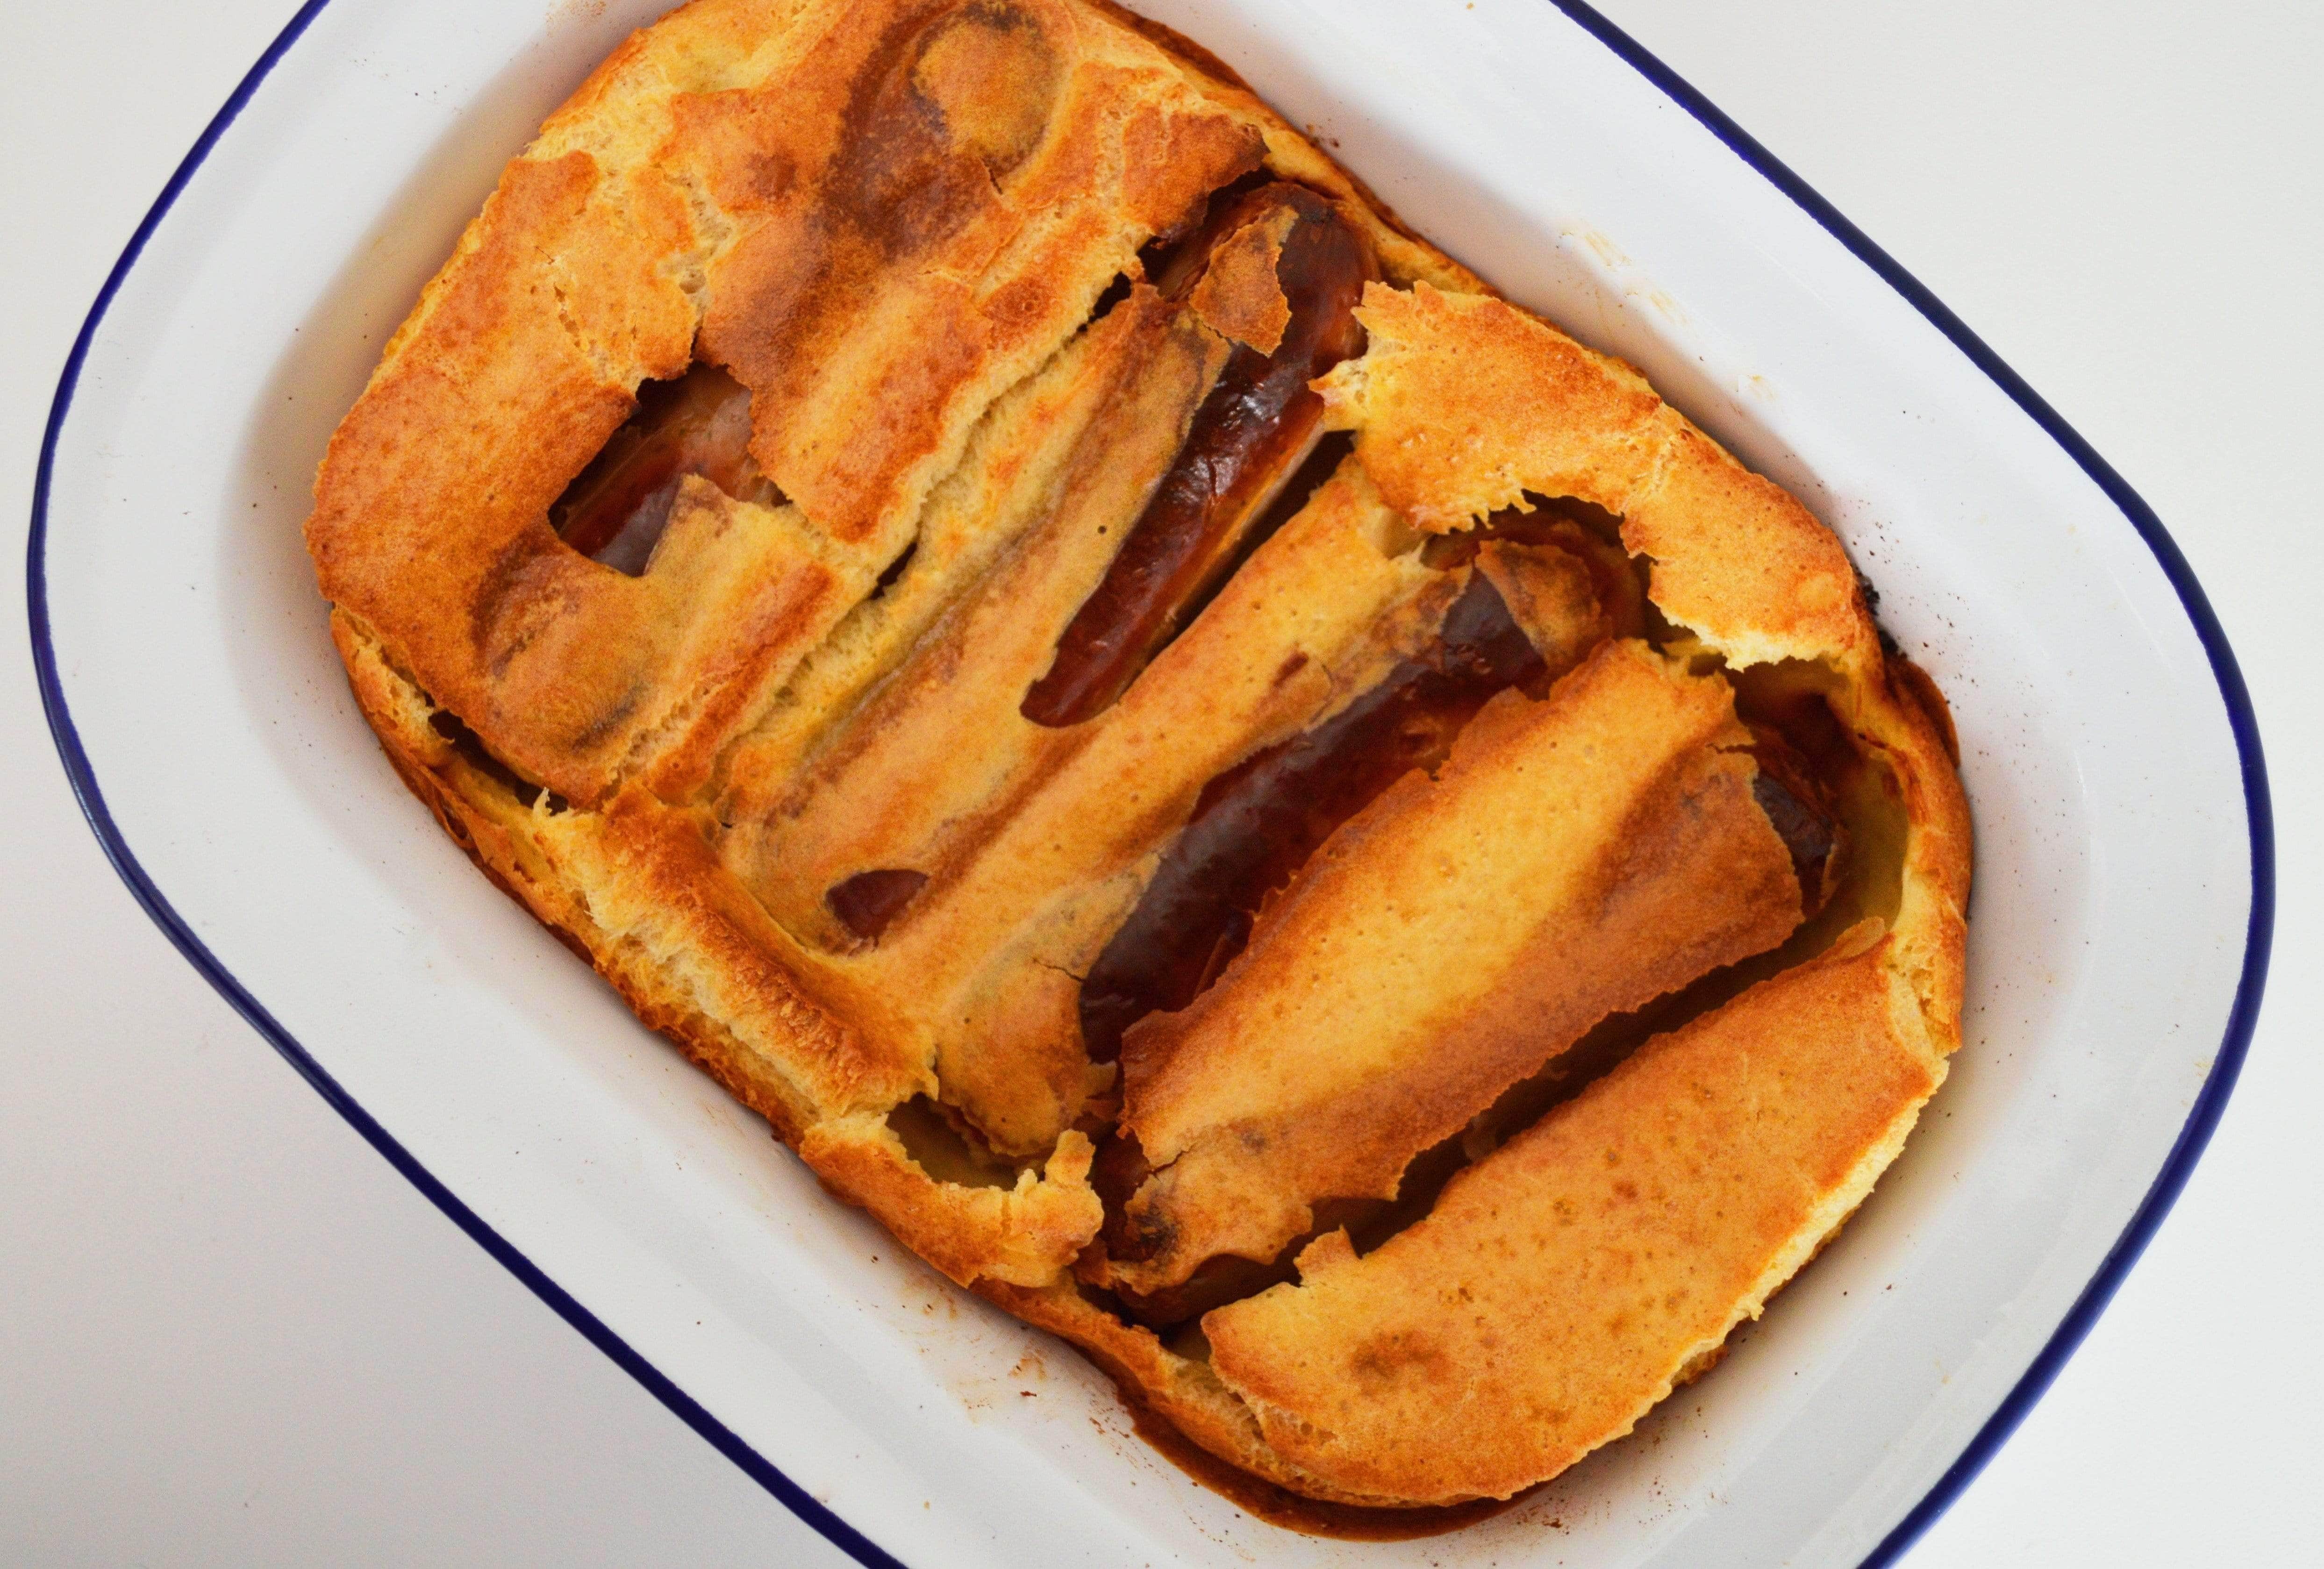 Venison toad-in-the-hole